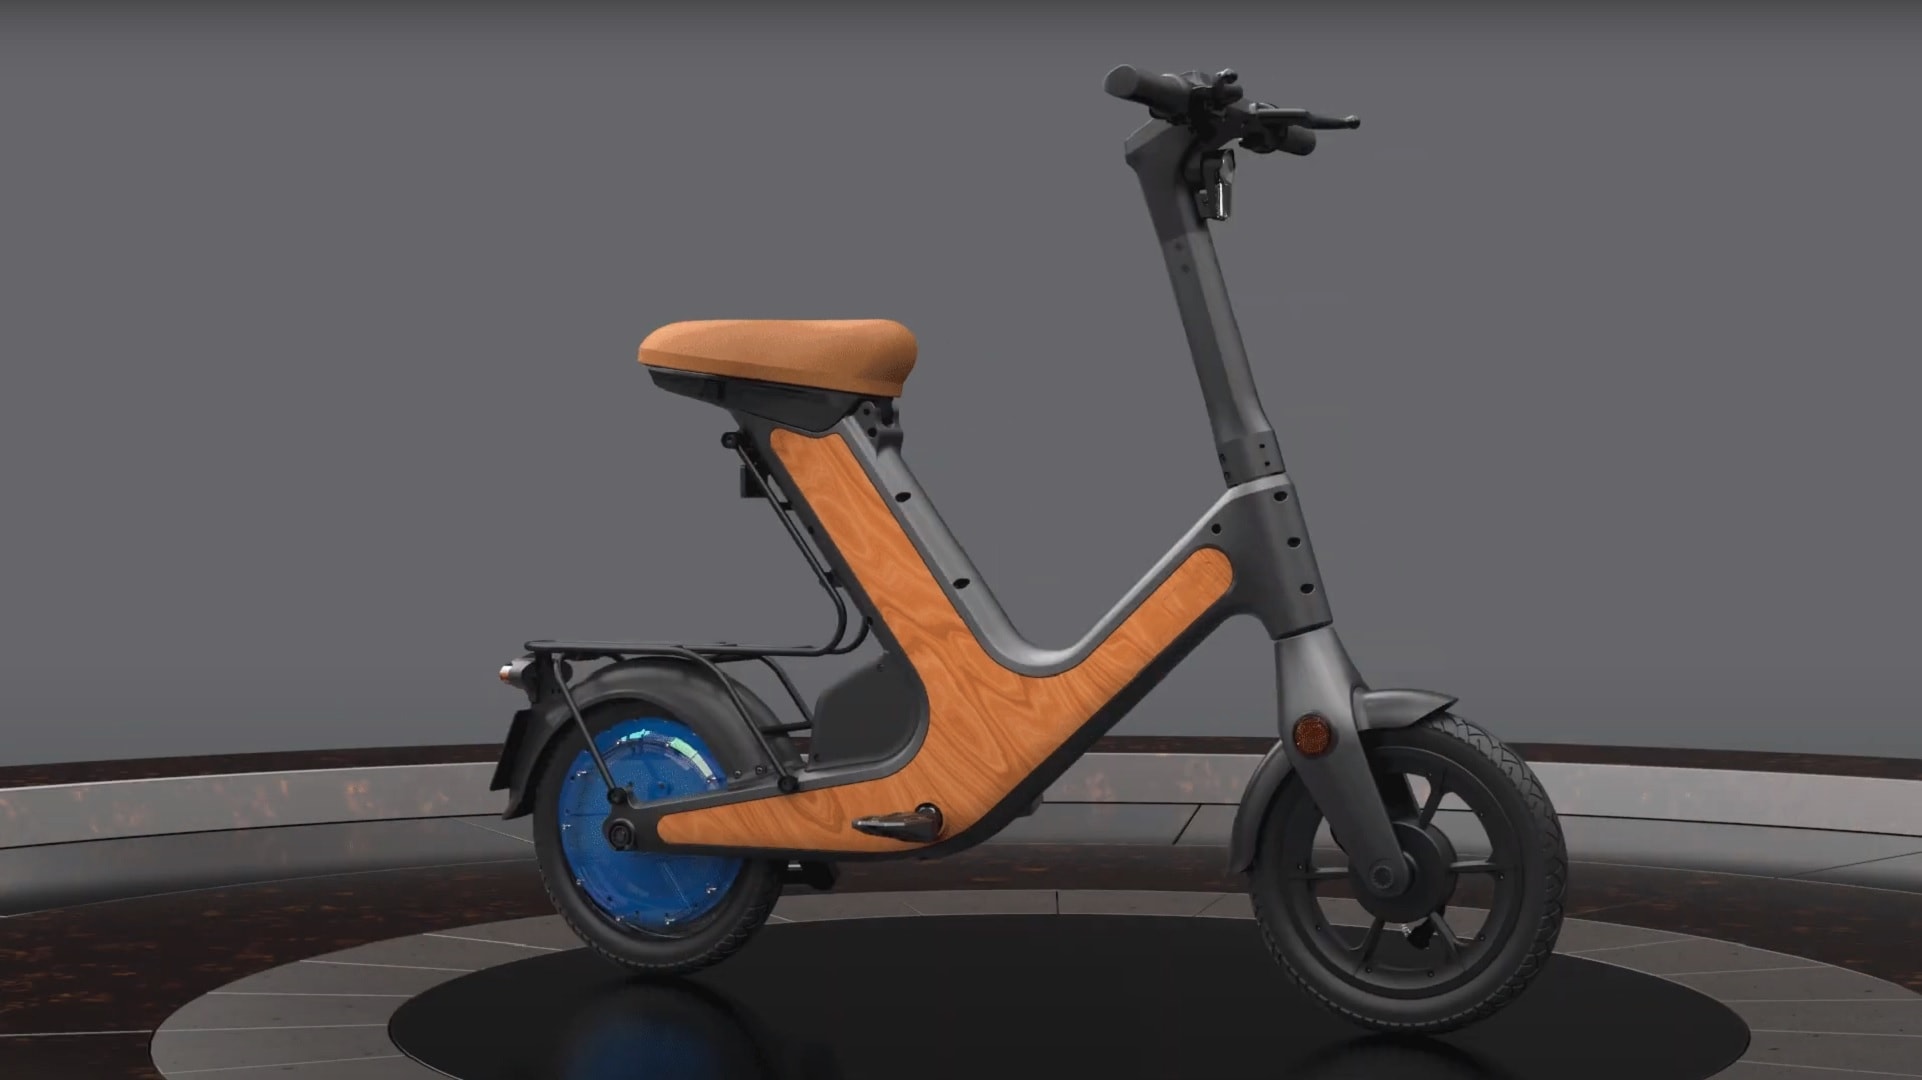 Minimalist-Looking E-Moped Has a Magnesium Frame, Claims to be the World's  Lightest - autoevolution